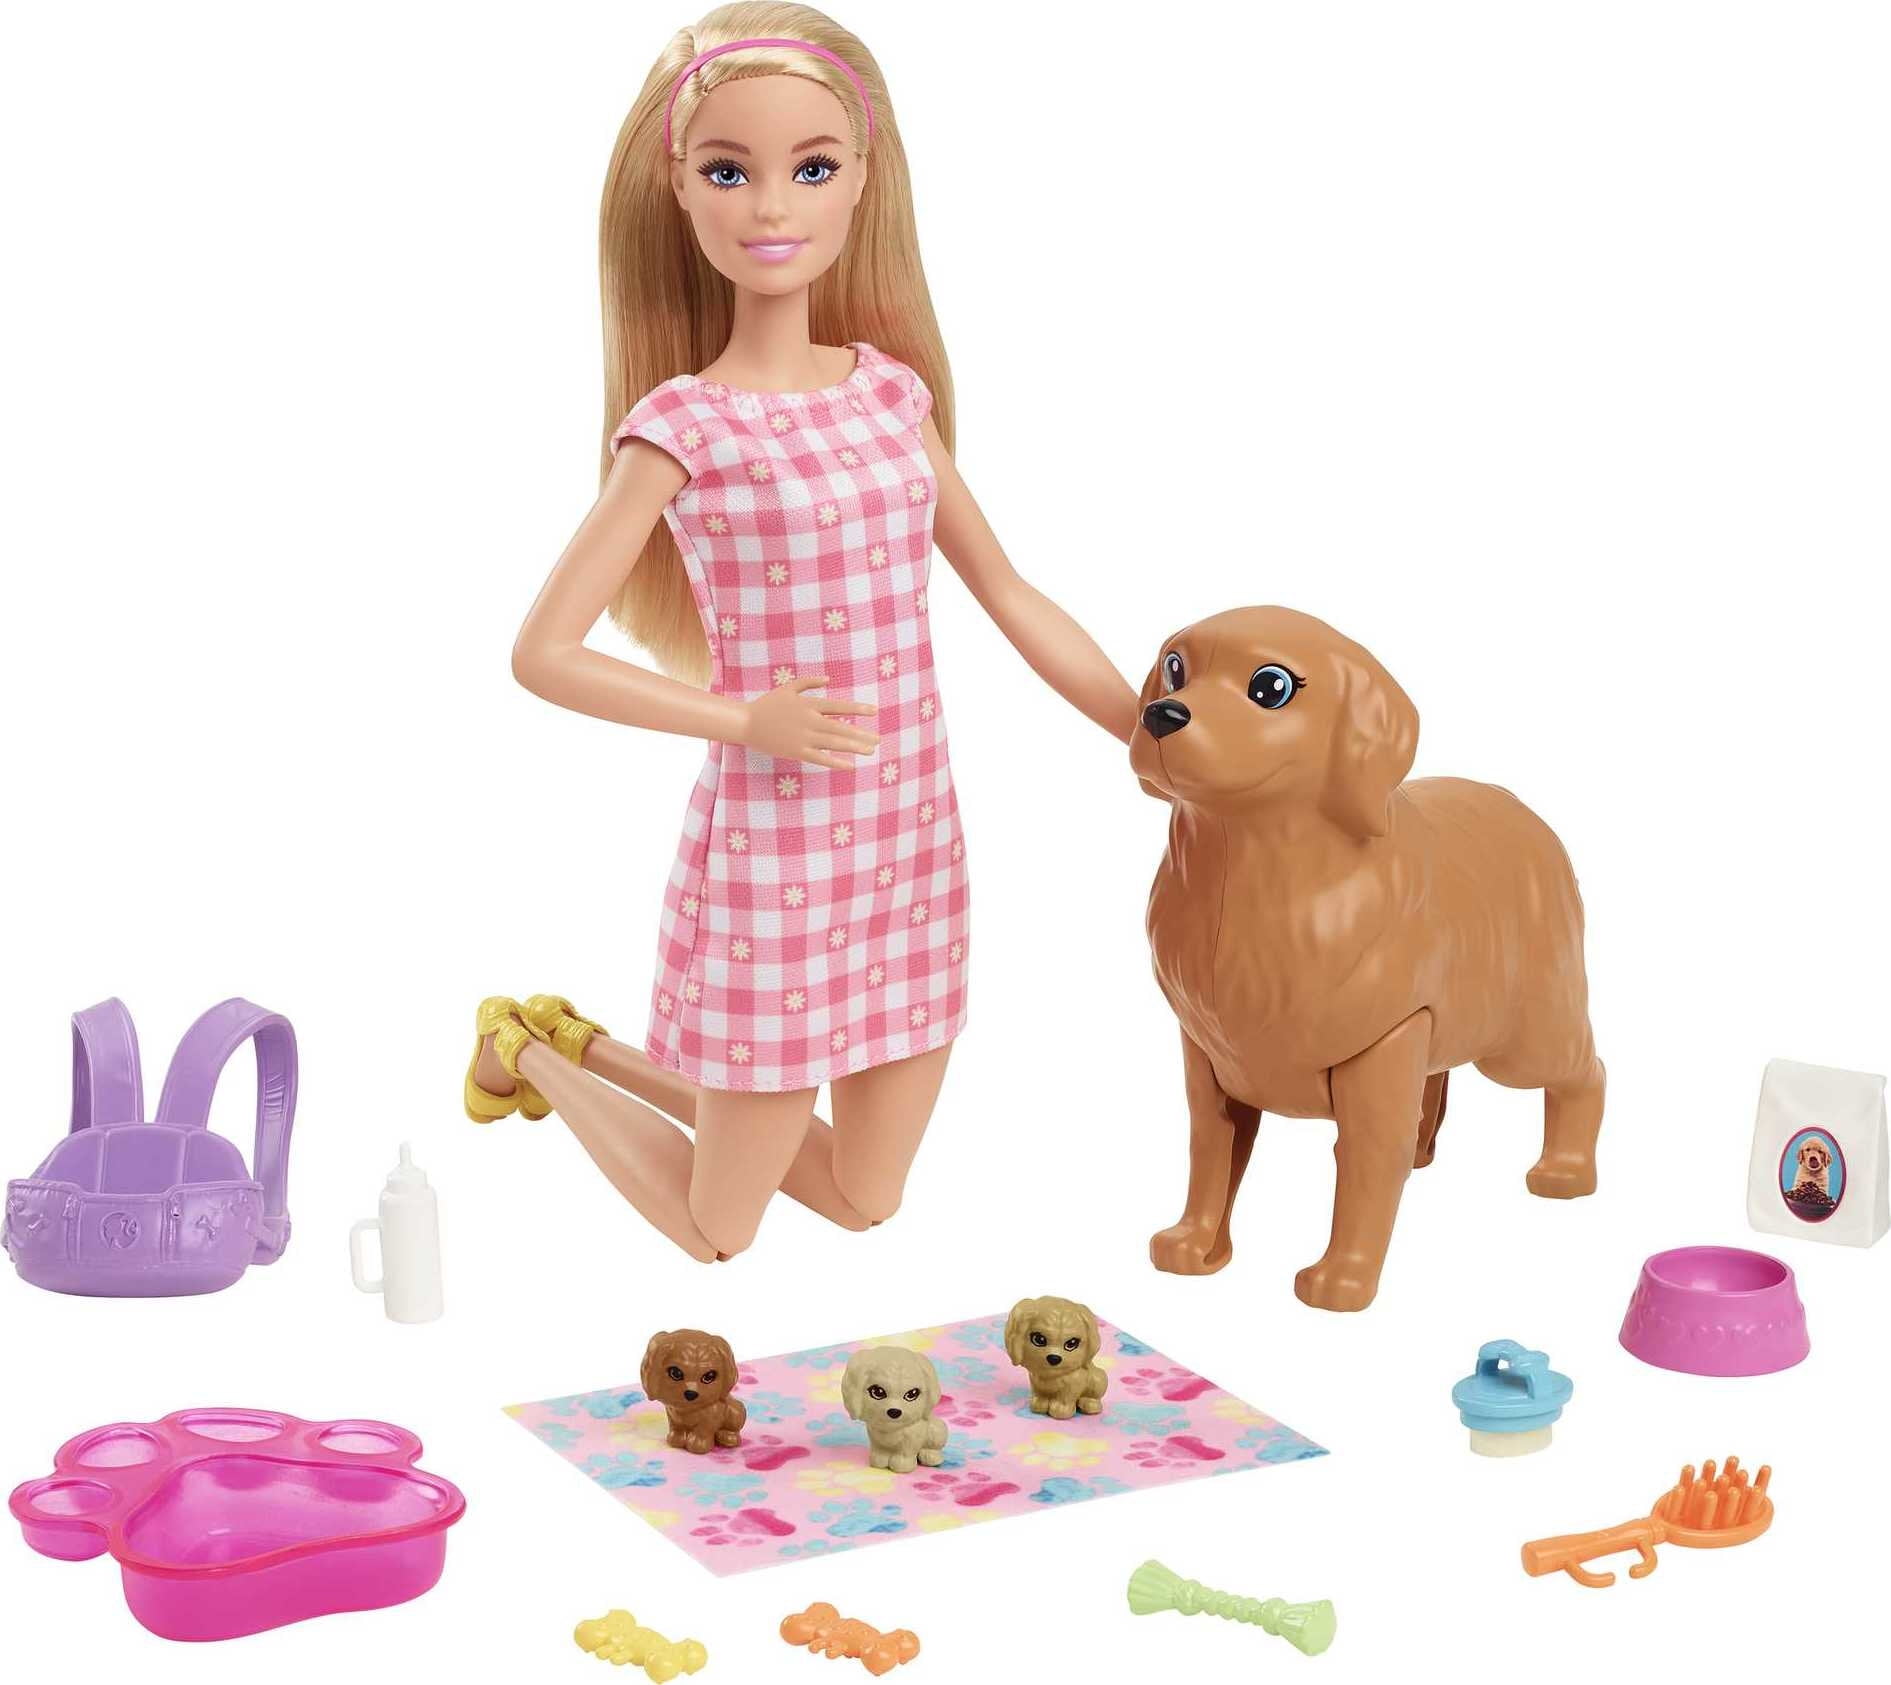 2 Barbie Doll Boat Pool Play set #4 with Puppy, Chelsea, Accessories, bath  fun